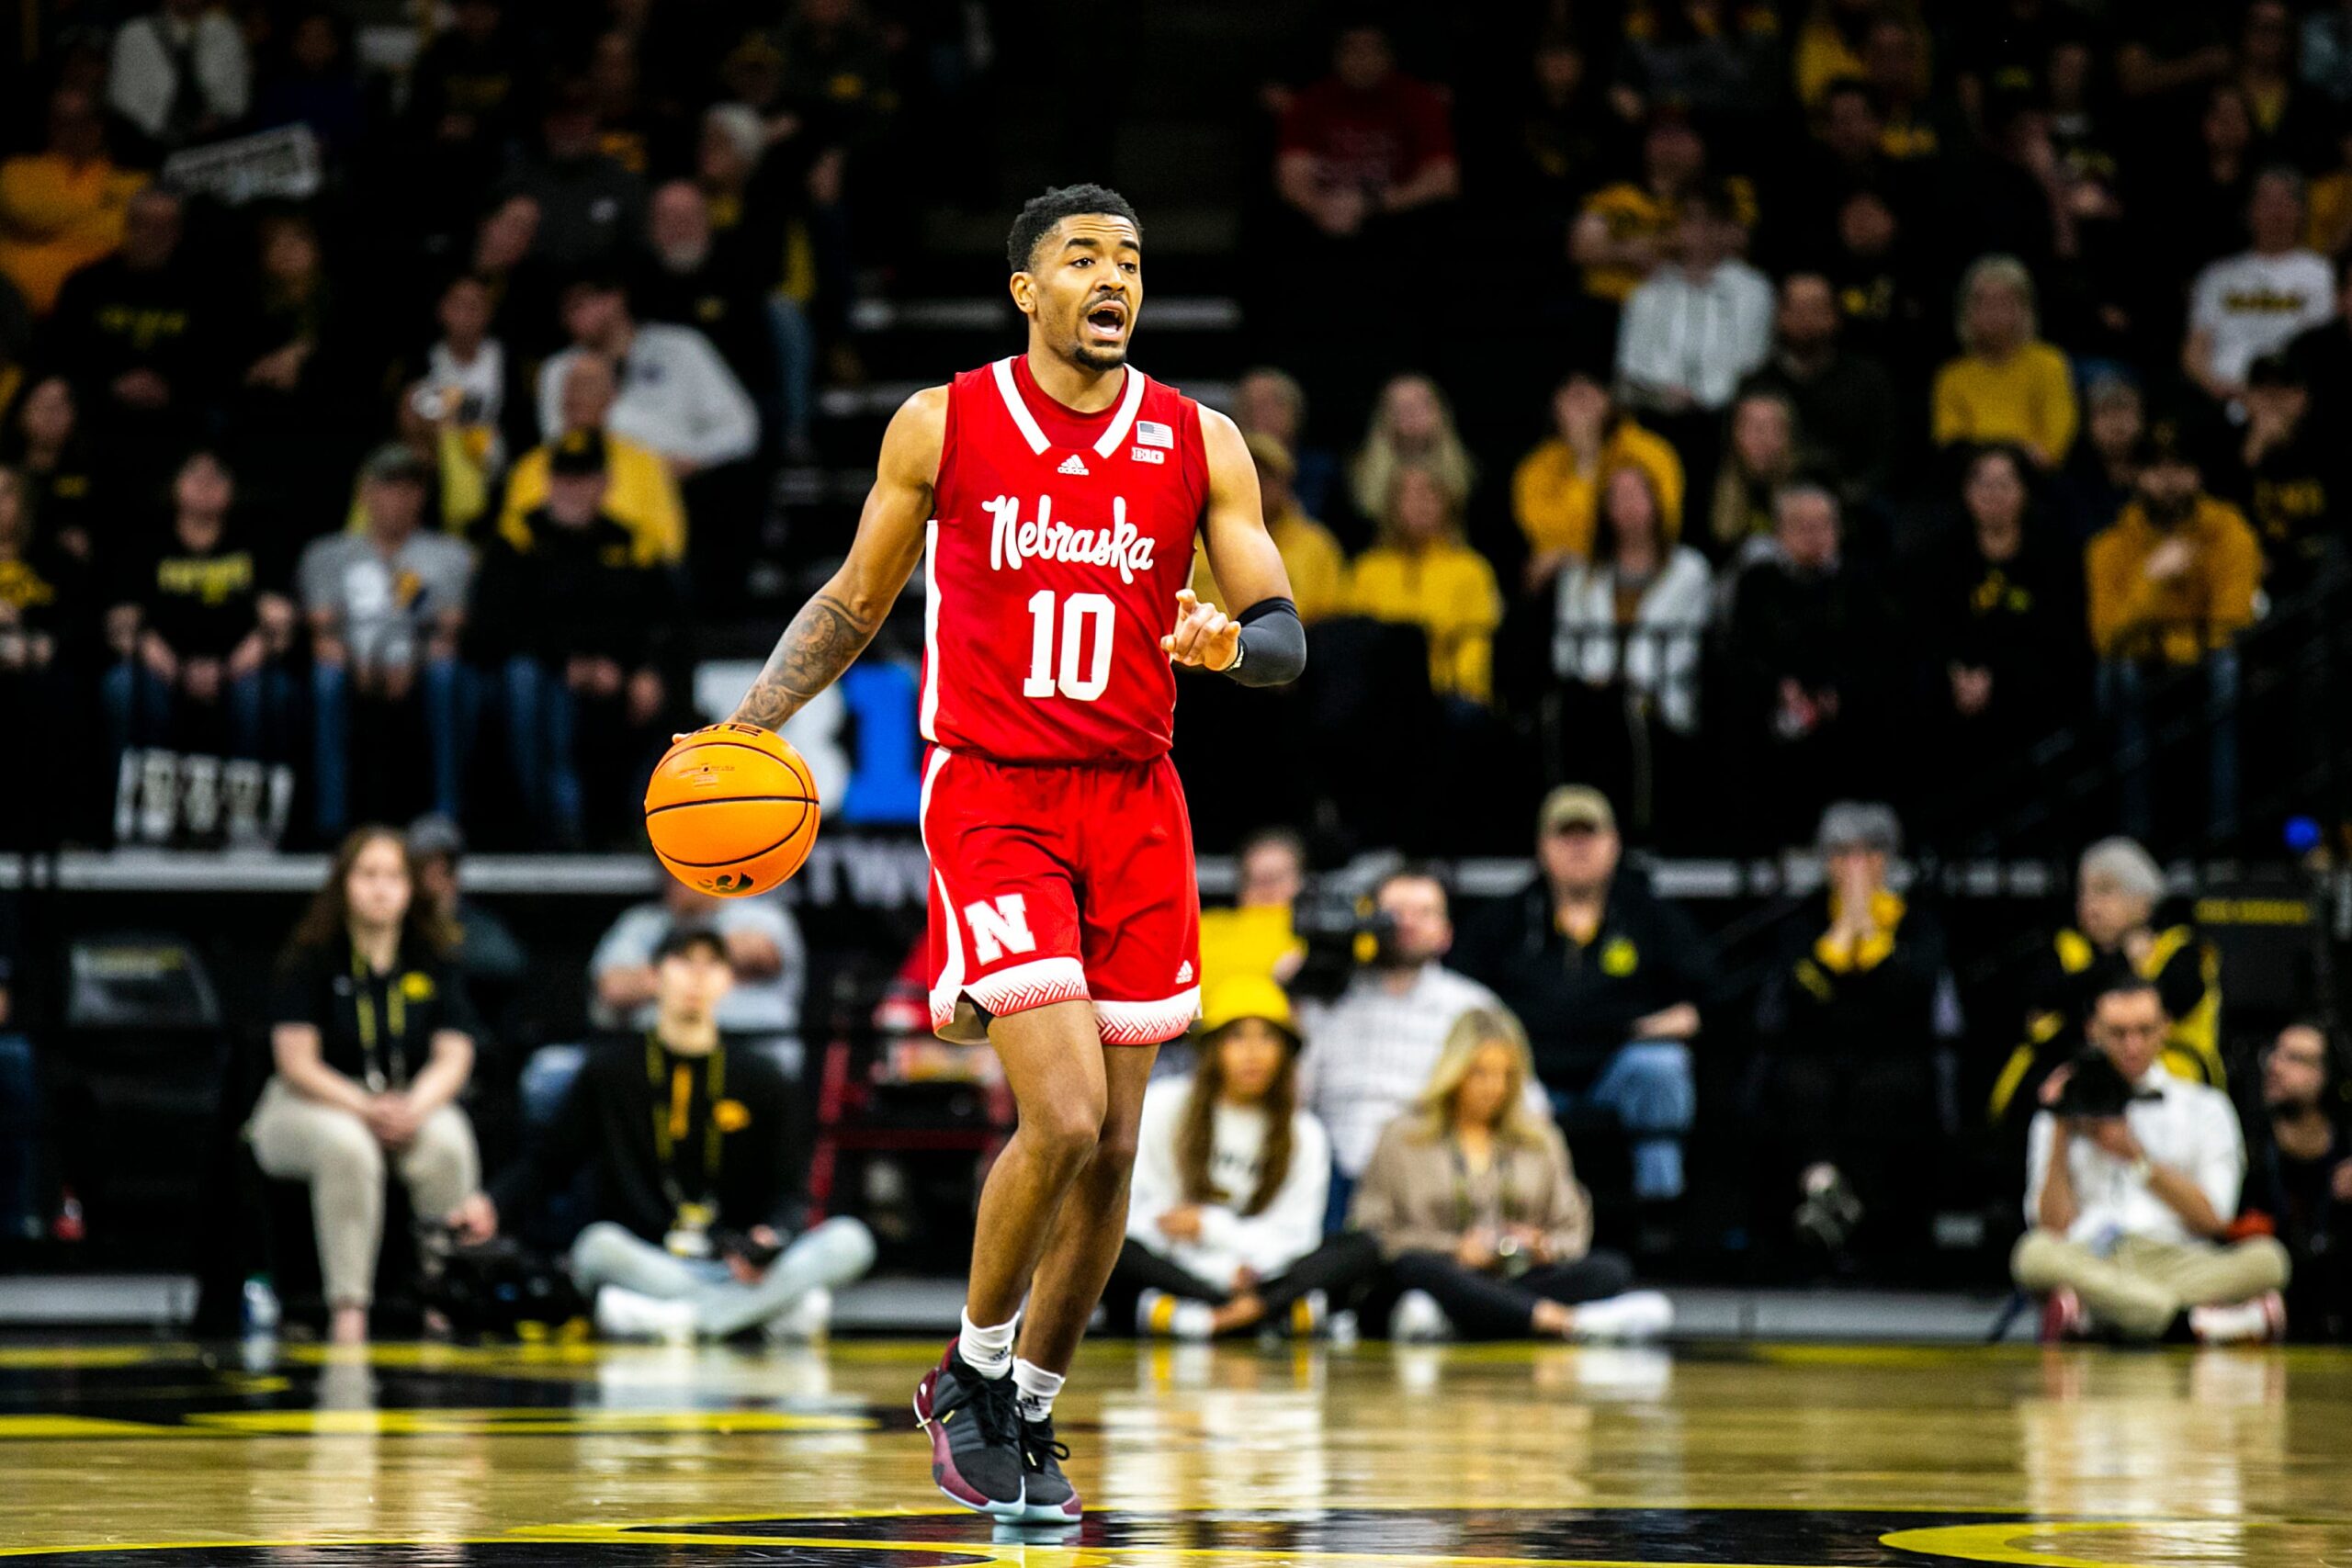 3 thoughts on Jamarques Lawrence transfer from Nebraska basketball